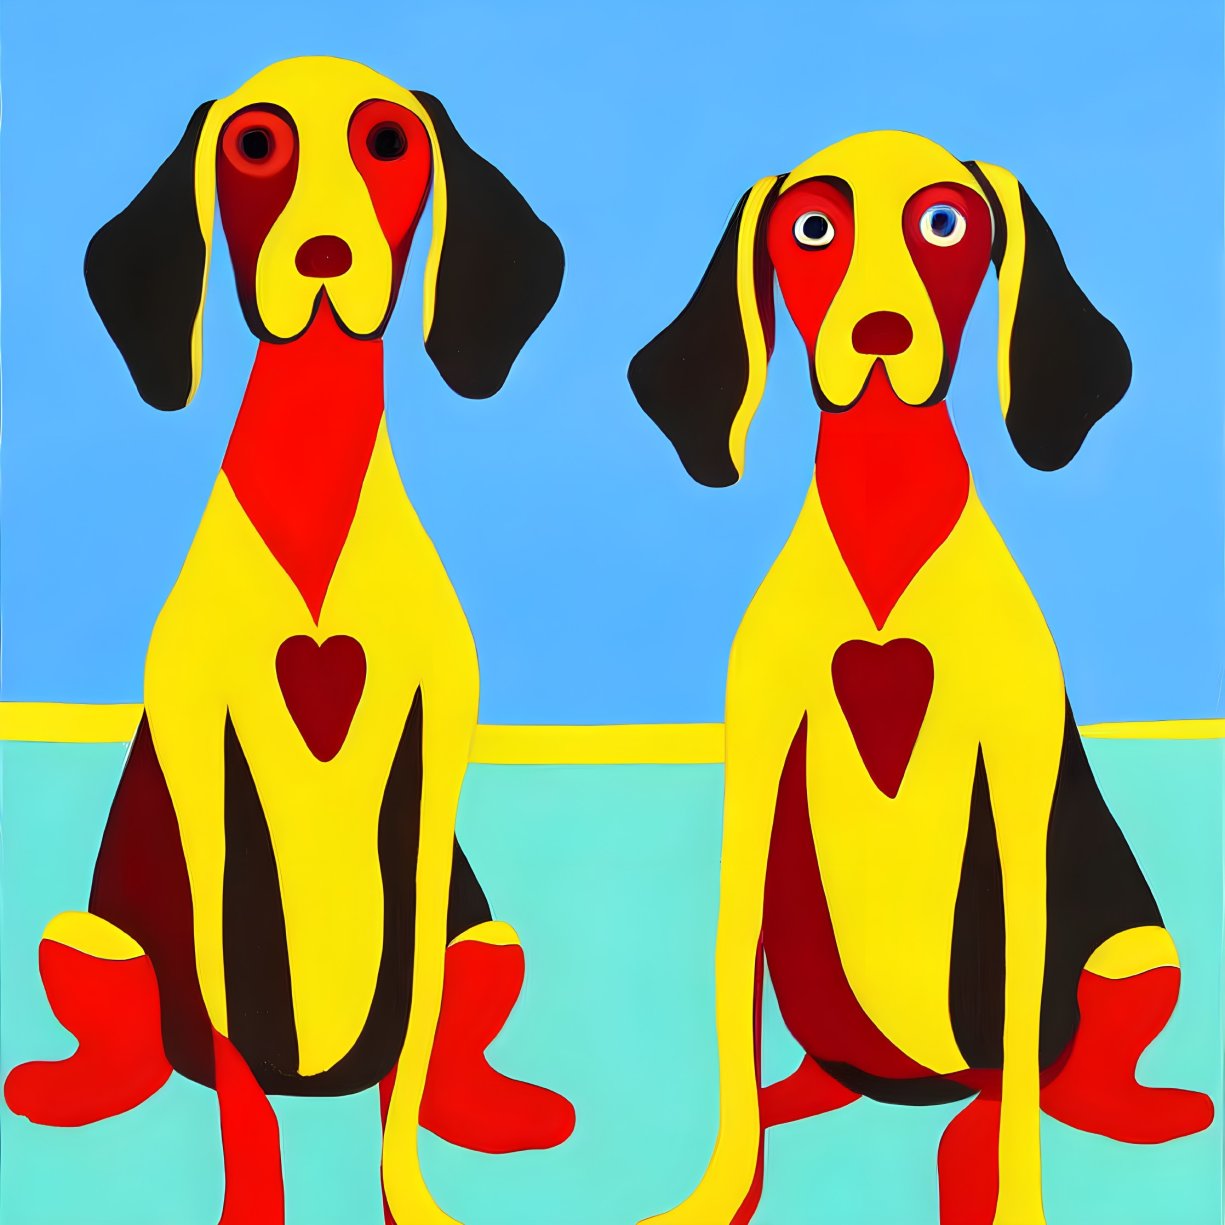 Stylized cartoon dogs with heart-shaped features on blue and yellow background